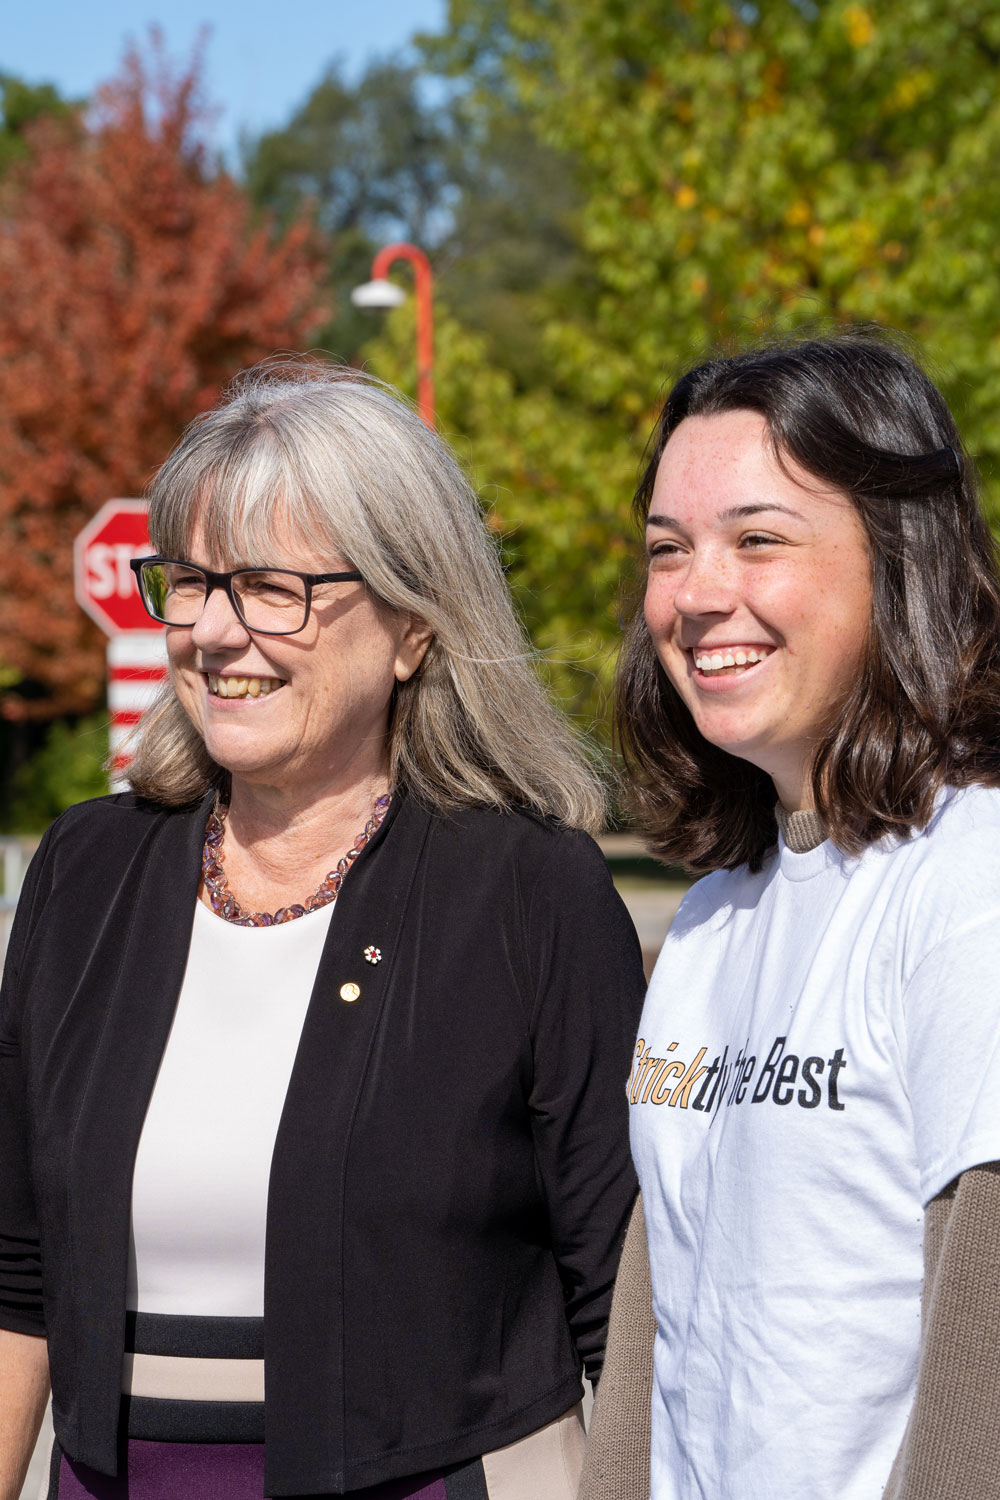 Donna Strickland stands with Emma Magee who is wearing a shirt that says Sticktly the best